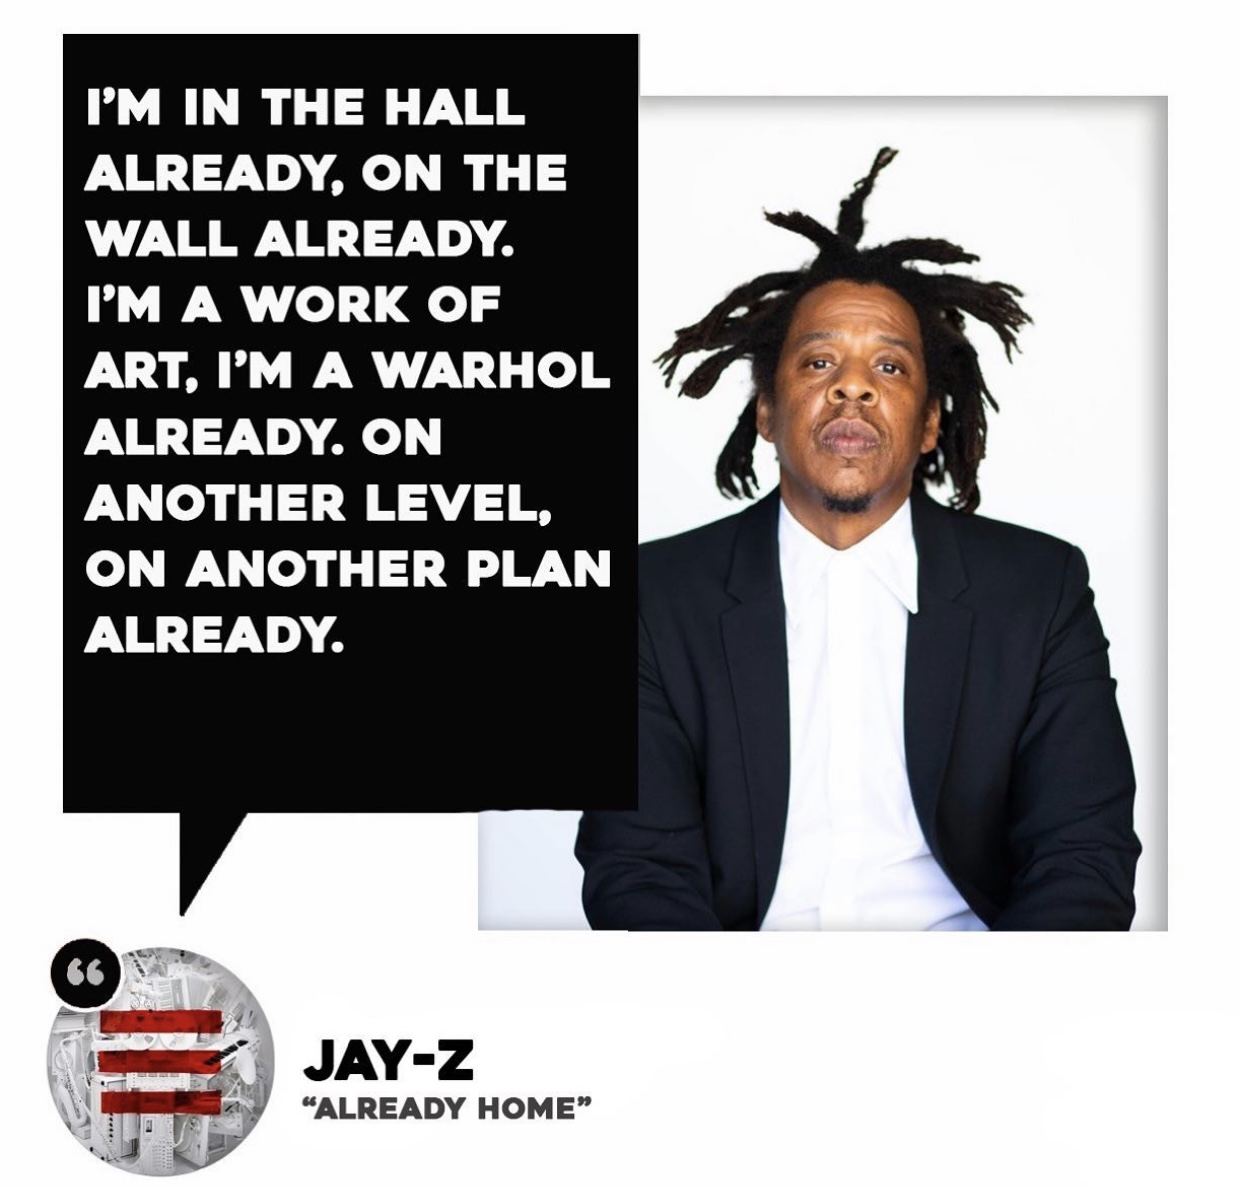 Exclusive: Jay-Z is now worth US$1.4 billion: he shares on Jack